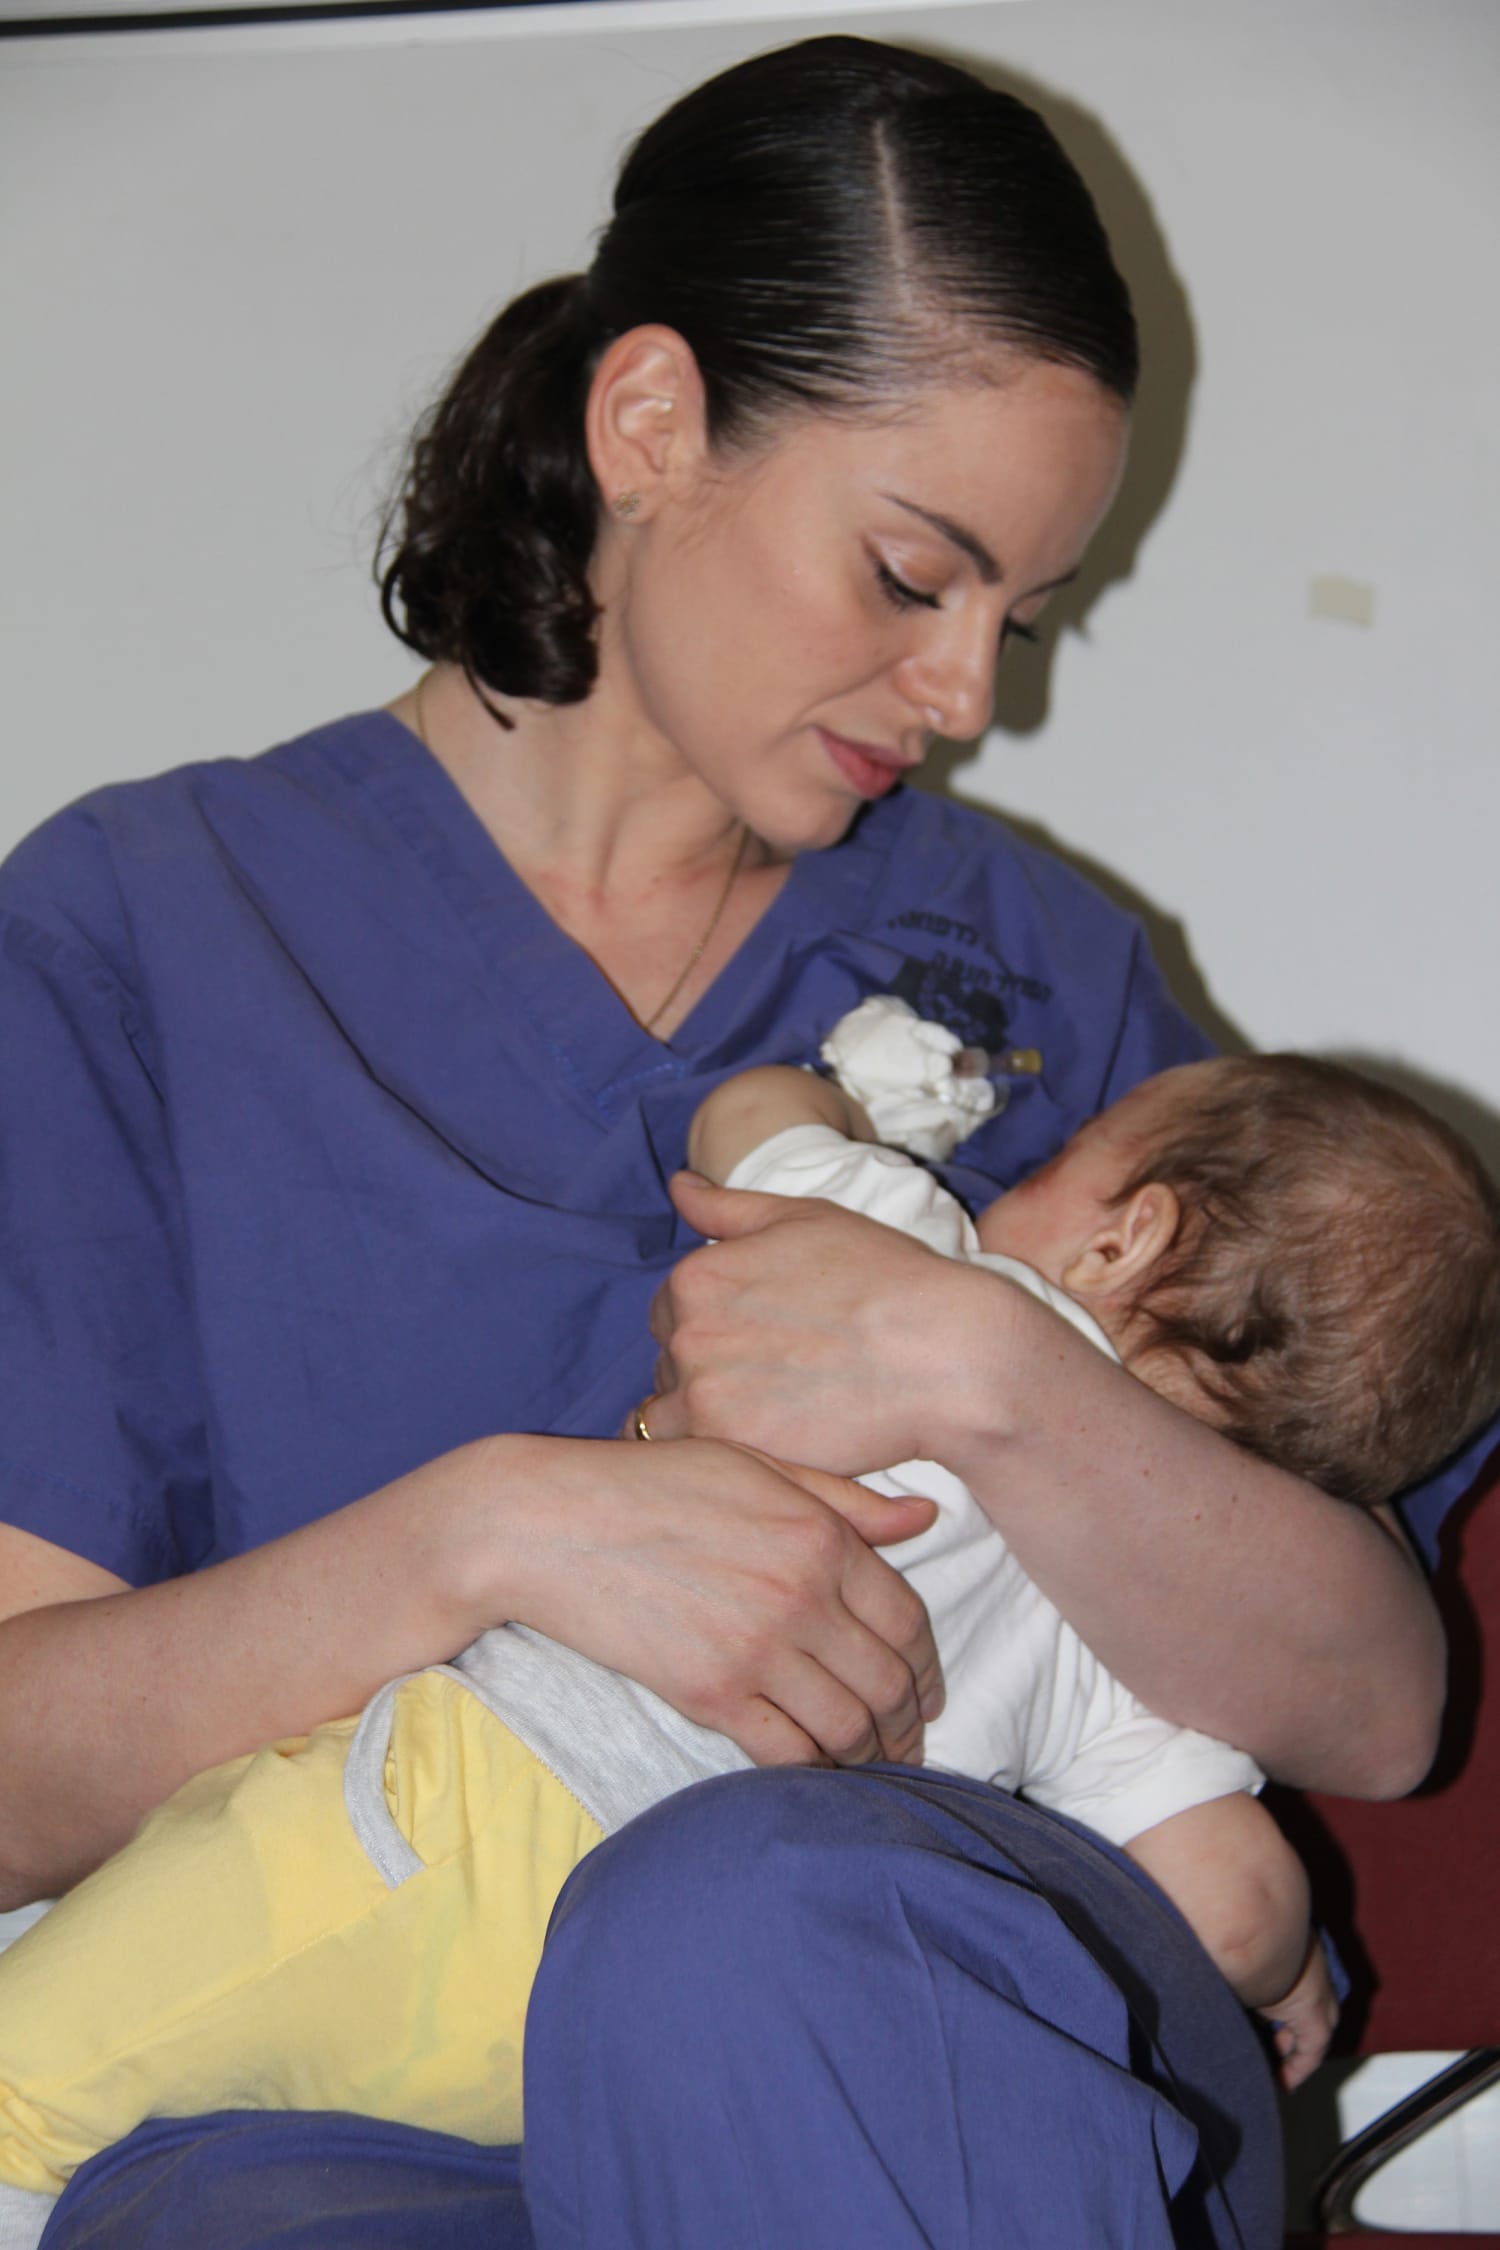 Israeli nurse breastfeeds Palestinian baby after mom hurt in accident